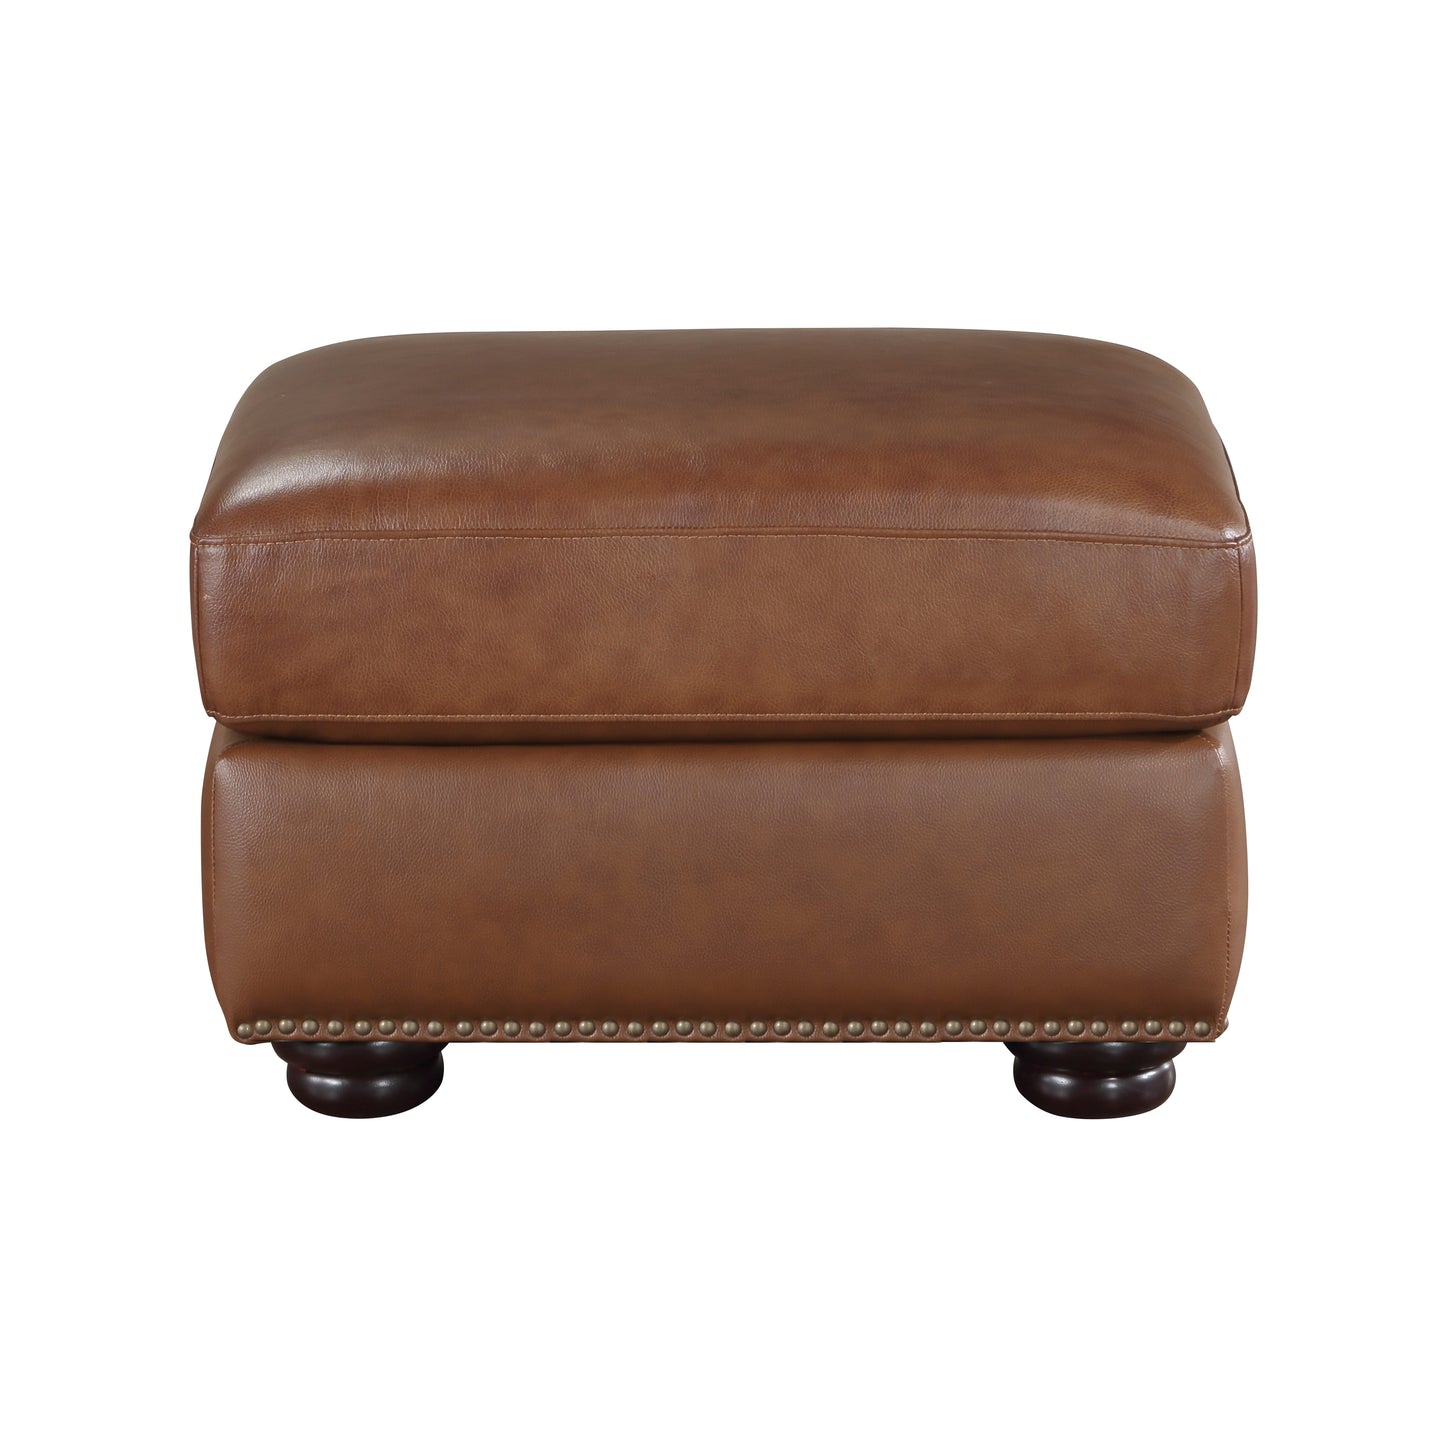 Attleboro Top Grain Leather Ottoman BROWN ONLY